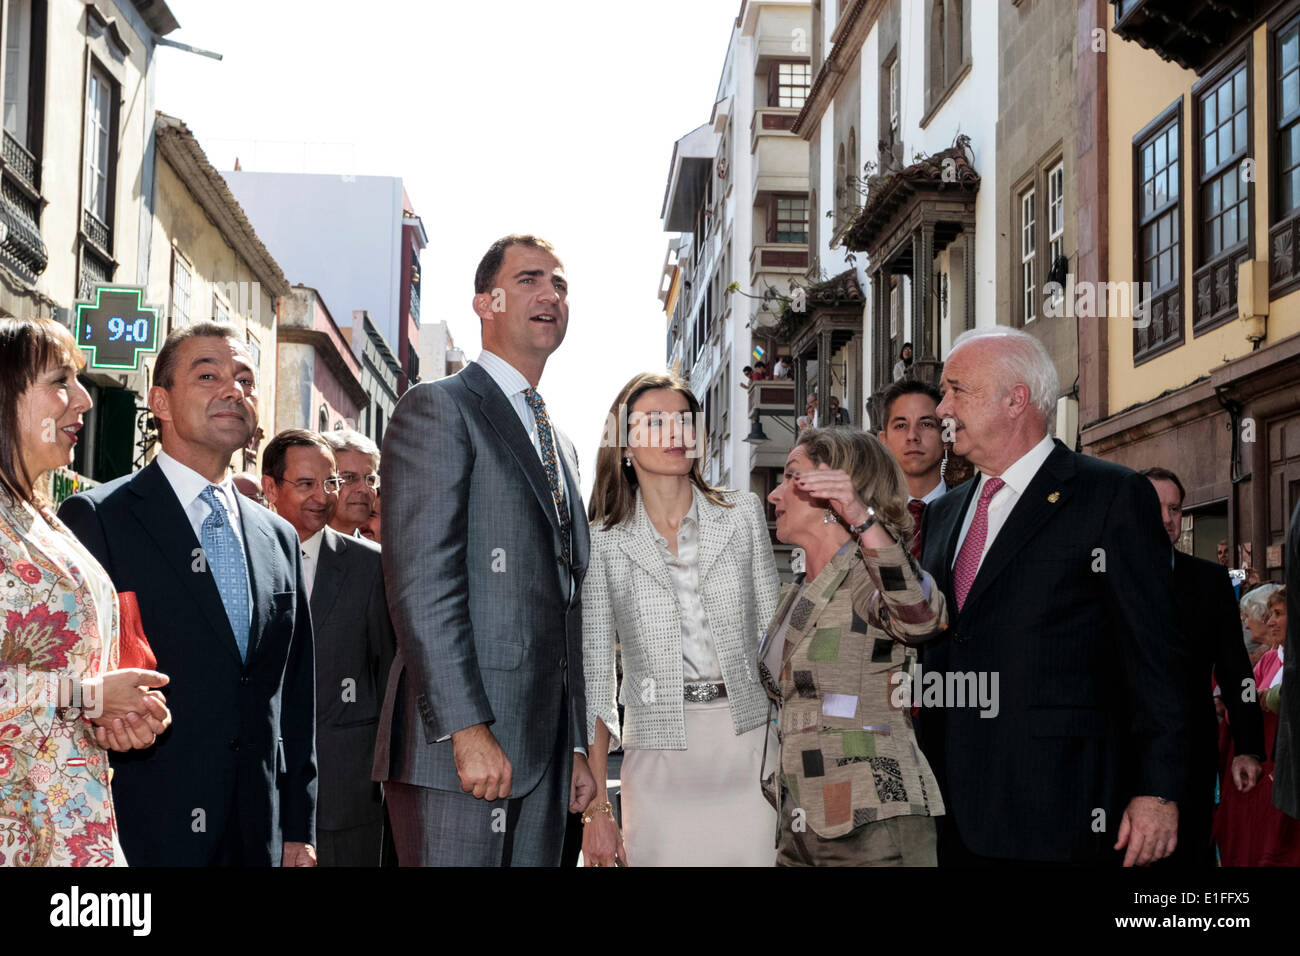 Prince Felipe with his wife, Princess Letizia at the opening of the Teatro Leal in San Cristobal de La Laguna, Tenerife, on the 14th October 2008. Thay are the future king and queen of Spain after King Juan Carlos's announcement of his abdication. Stock Photo